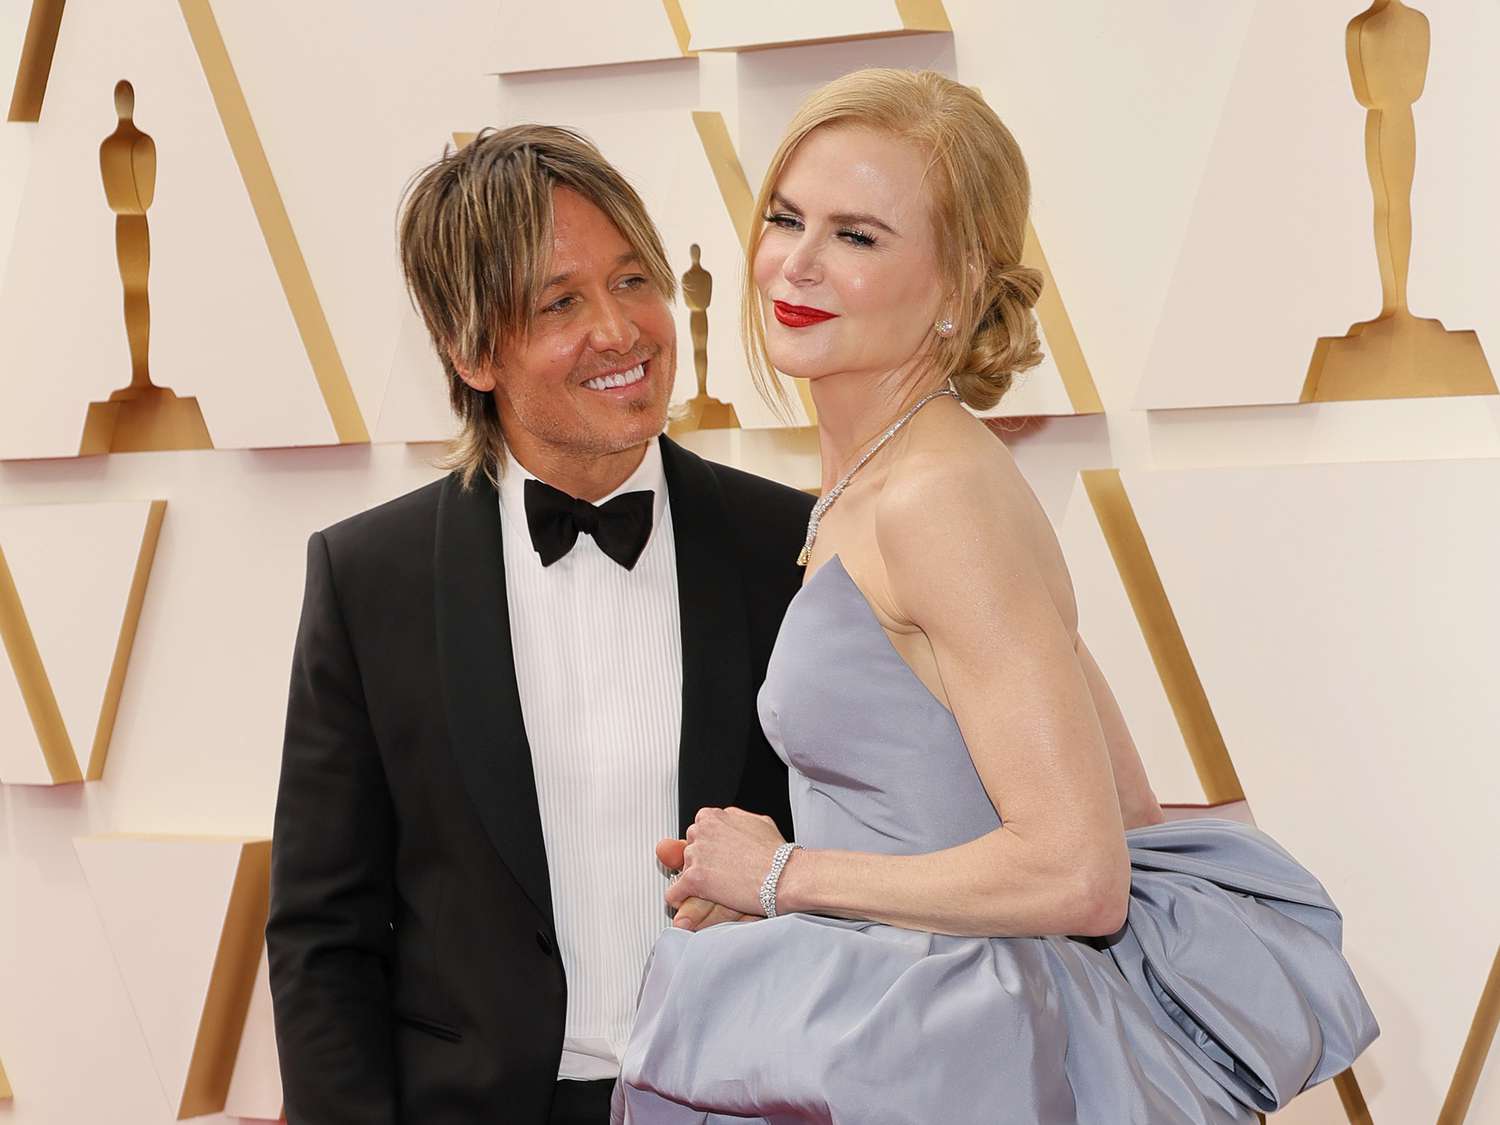 Keith Urban and Nicole Kidman attend the 94th Annual Academy Awards at Hollywood and Highland on March 27, 2022 in Hollywood, California